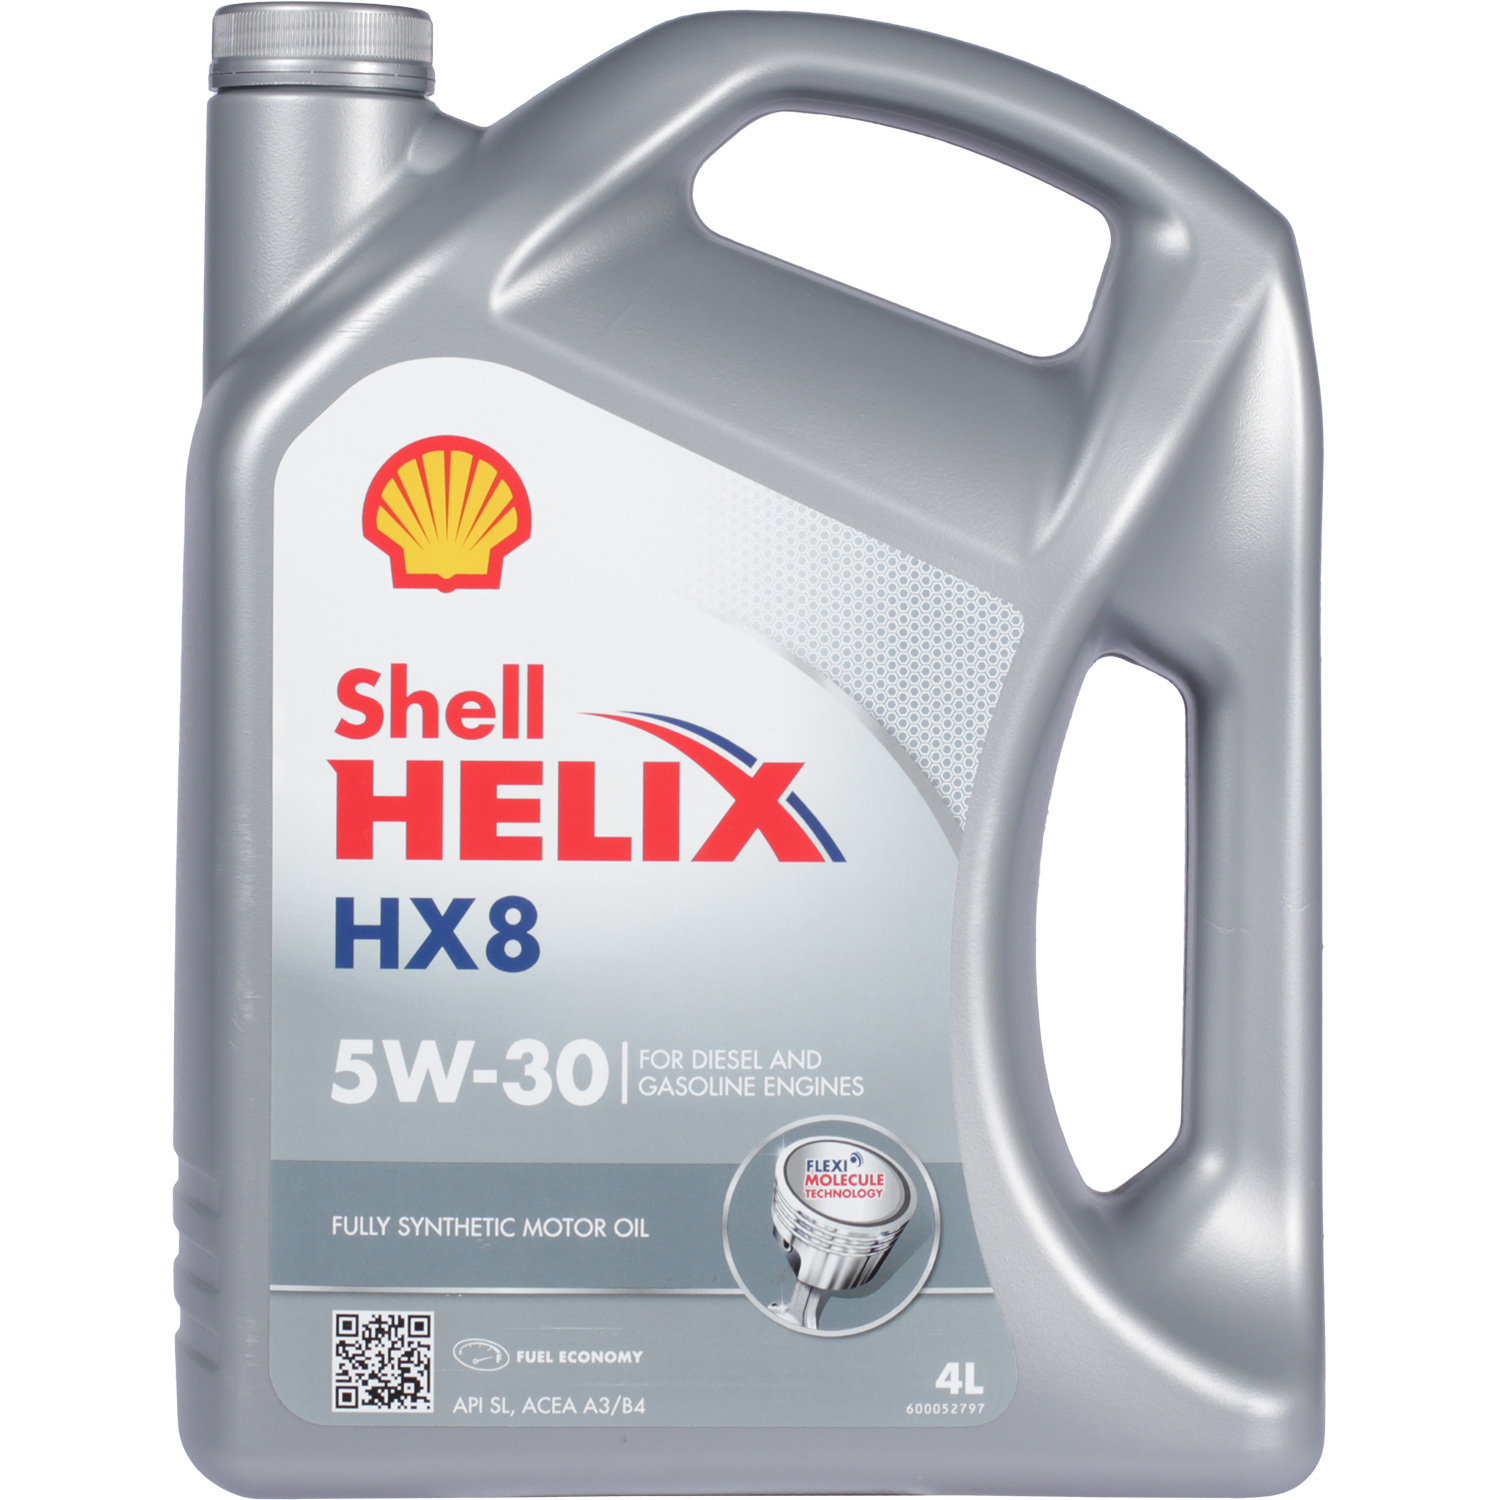 Shell Моторное масло Shell Helix HX8 5W-30, 4 л масло моторное shell hx8 5w40 1л